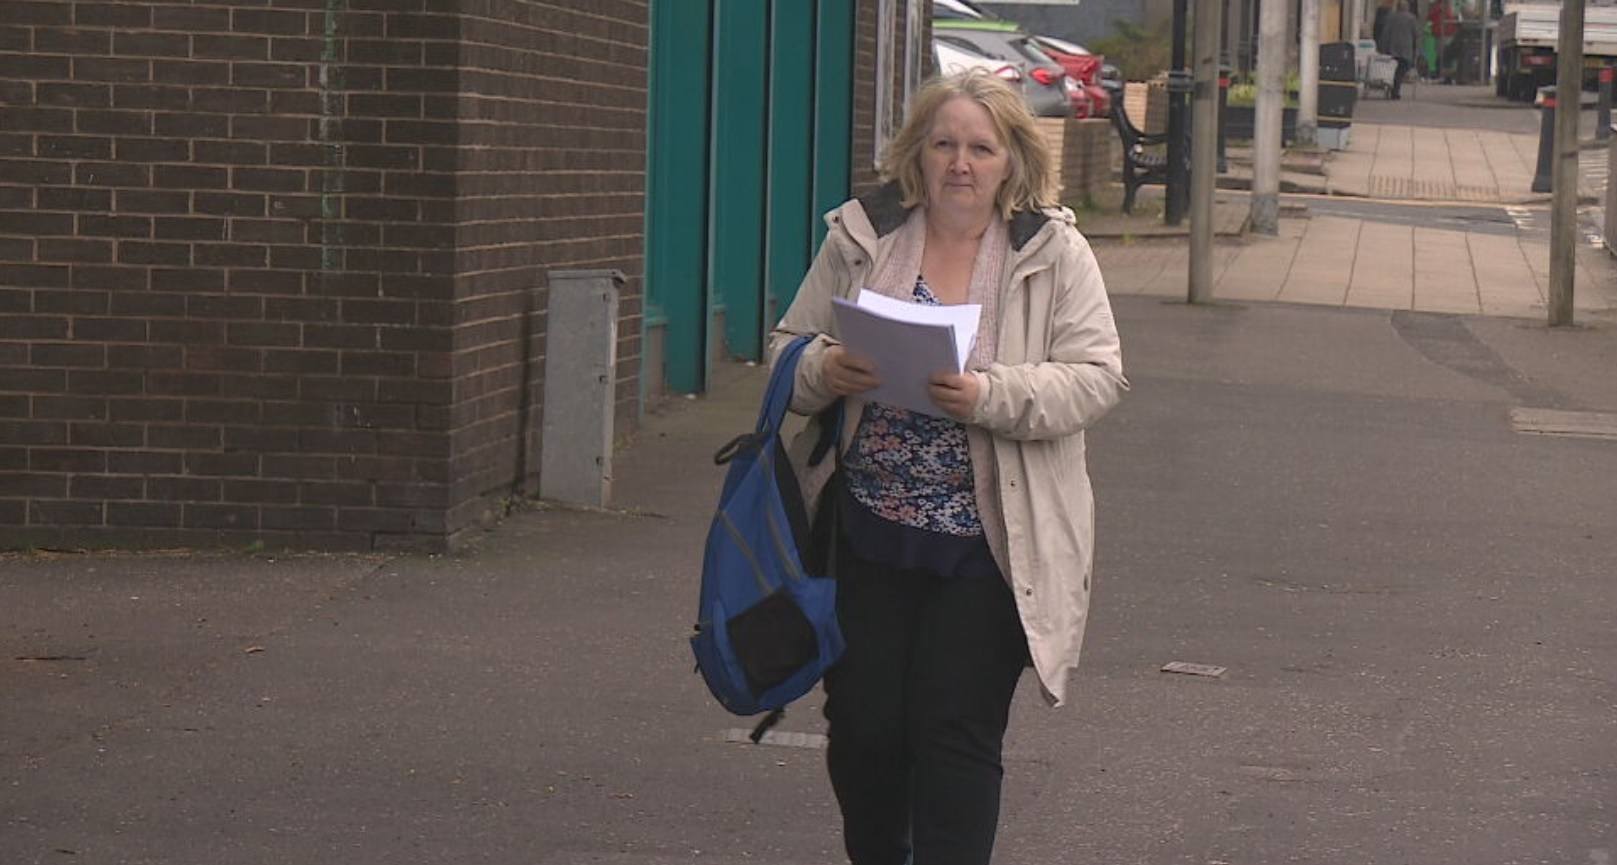 Joyce Cameron has launched a petition to save Broxburn swimming pool from closure